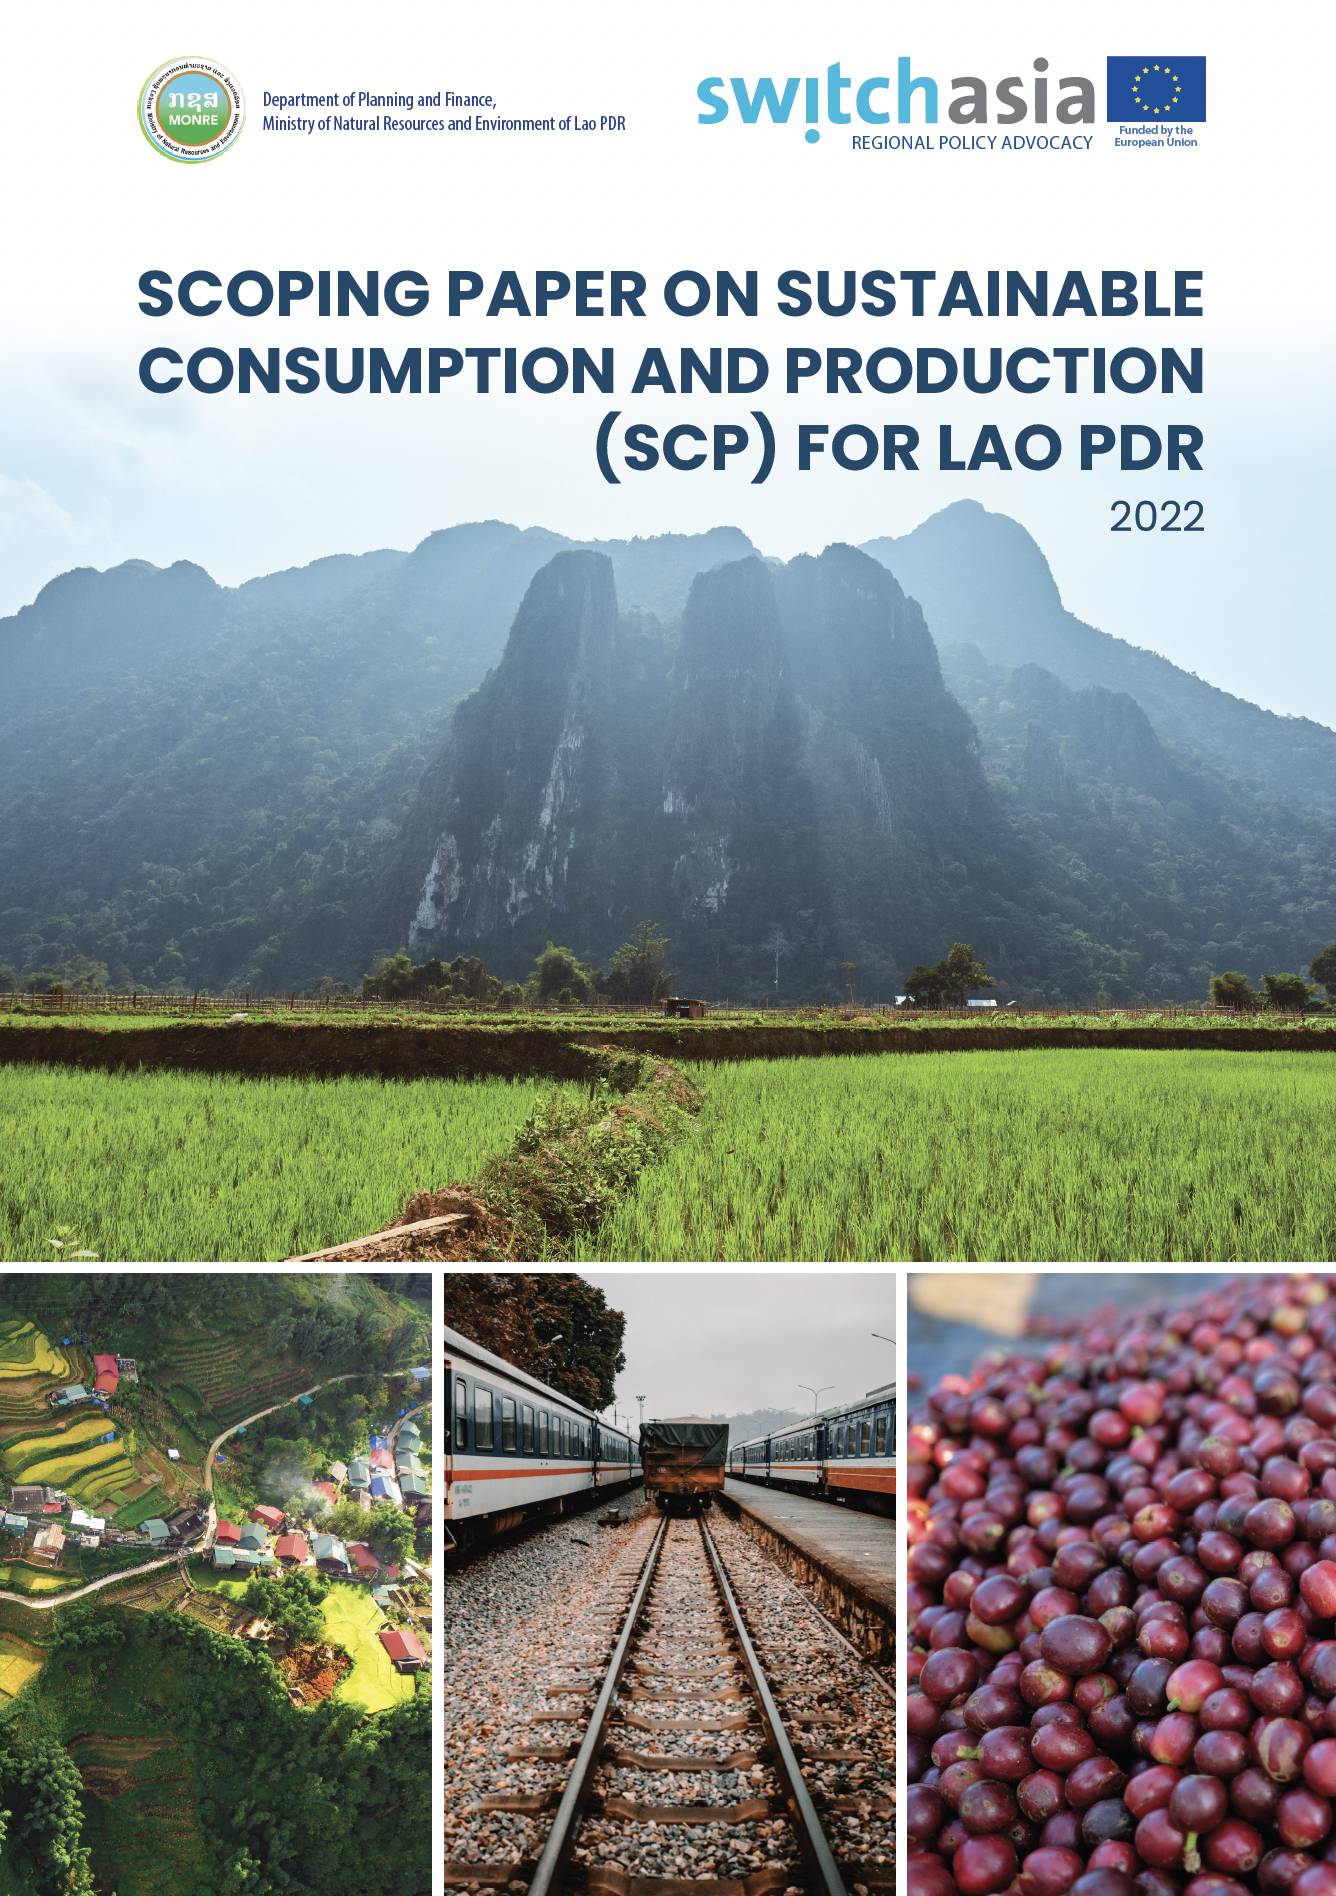 Scoping Paper on Sustainable Consumption and Production for Lao PDR